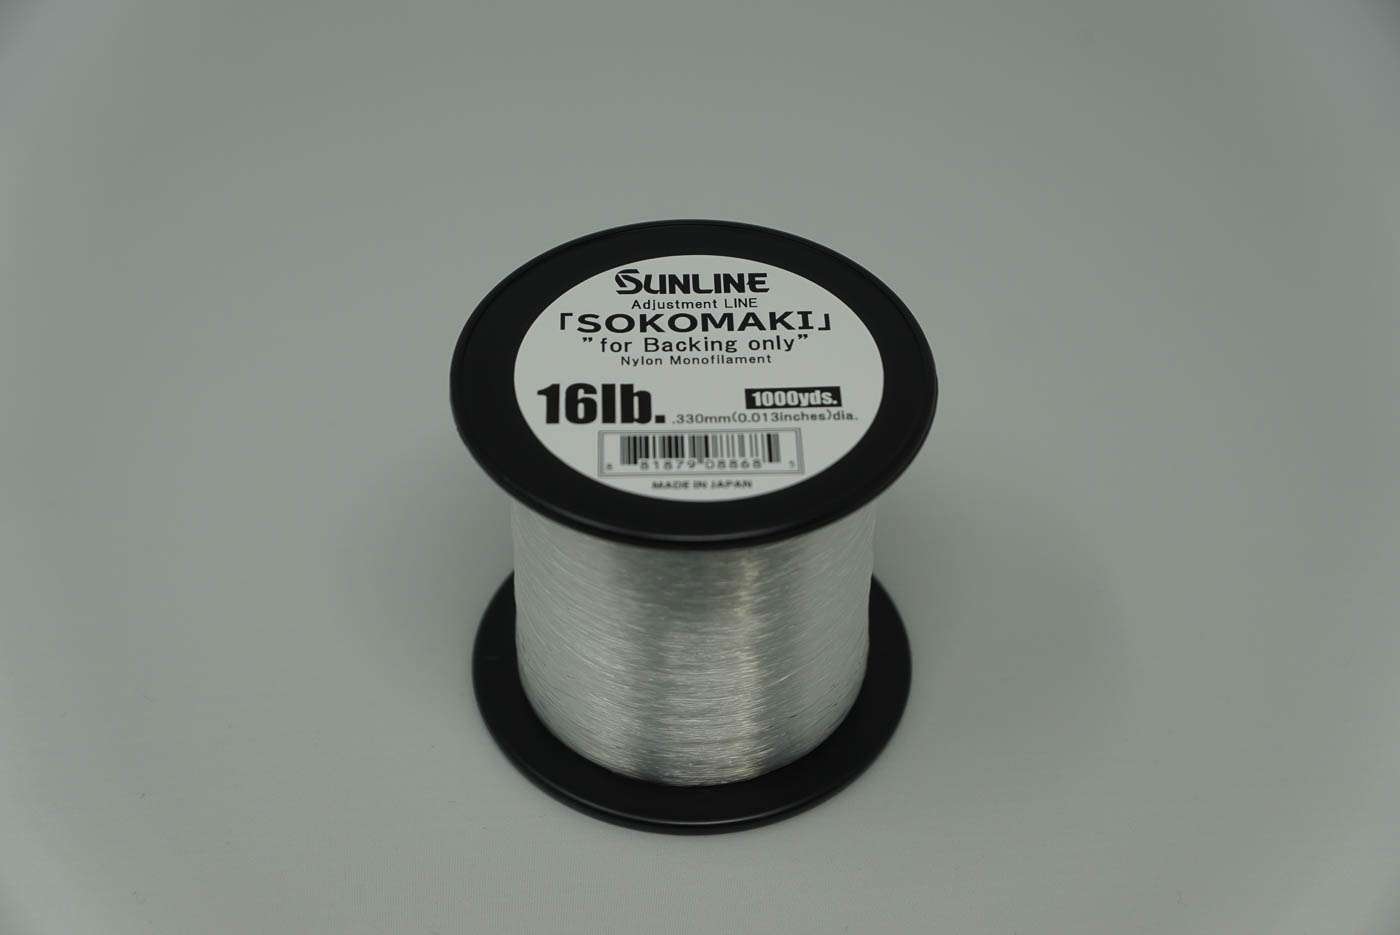 <p><strong>Sunline Sokomaki Backing Line</strong></p><p>Sokomaki Backing line is a nylon material made specifically for the use of reel backing for baitcast reels. The backing eliminates hunting for left over spools of line, or wasting primary line to properly fill reels. Sokomaki is made with a uniform diameter to provide a stable backing for the main line choice, providing extended life and easier line respooling. Sold in 1,000-yard bulk spools in 16-pound test line size. $12.49. <a href=